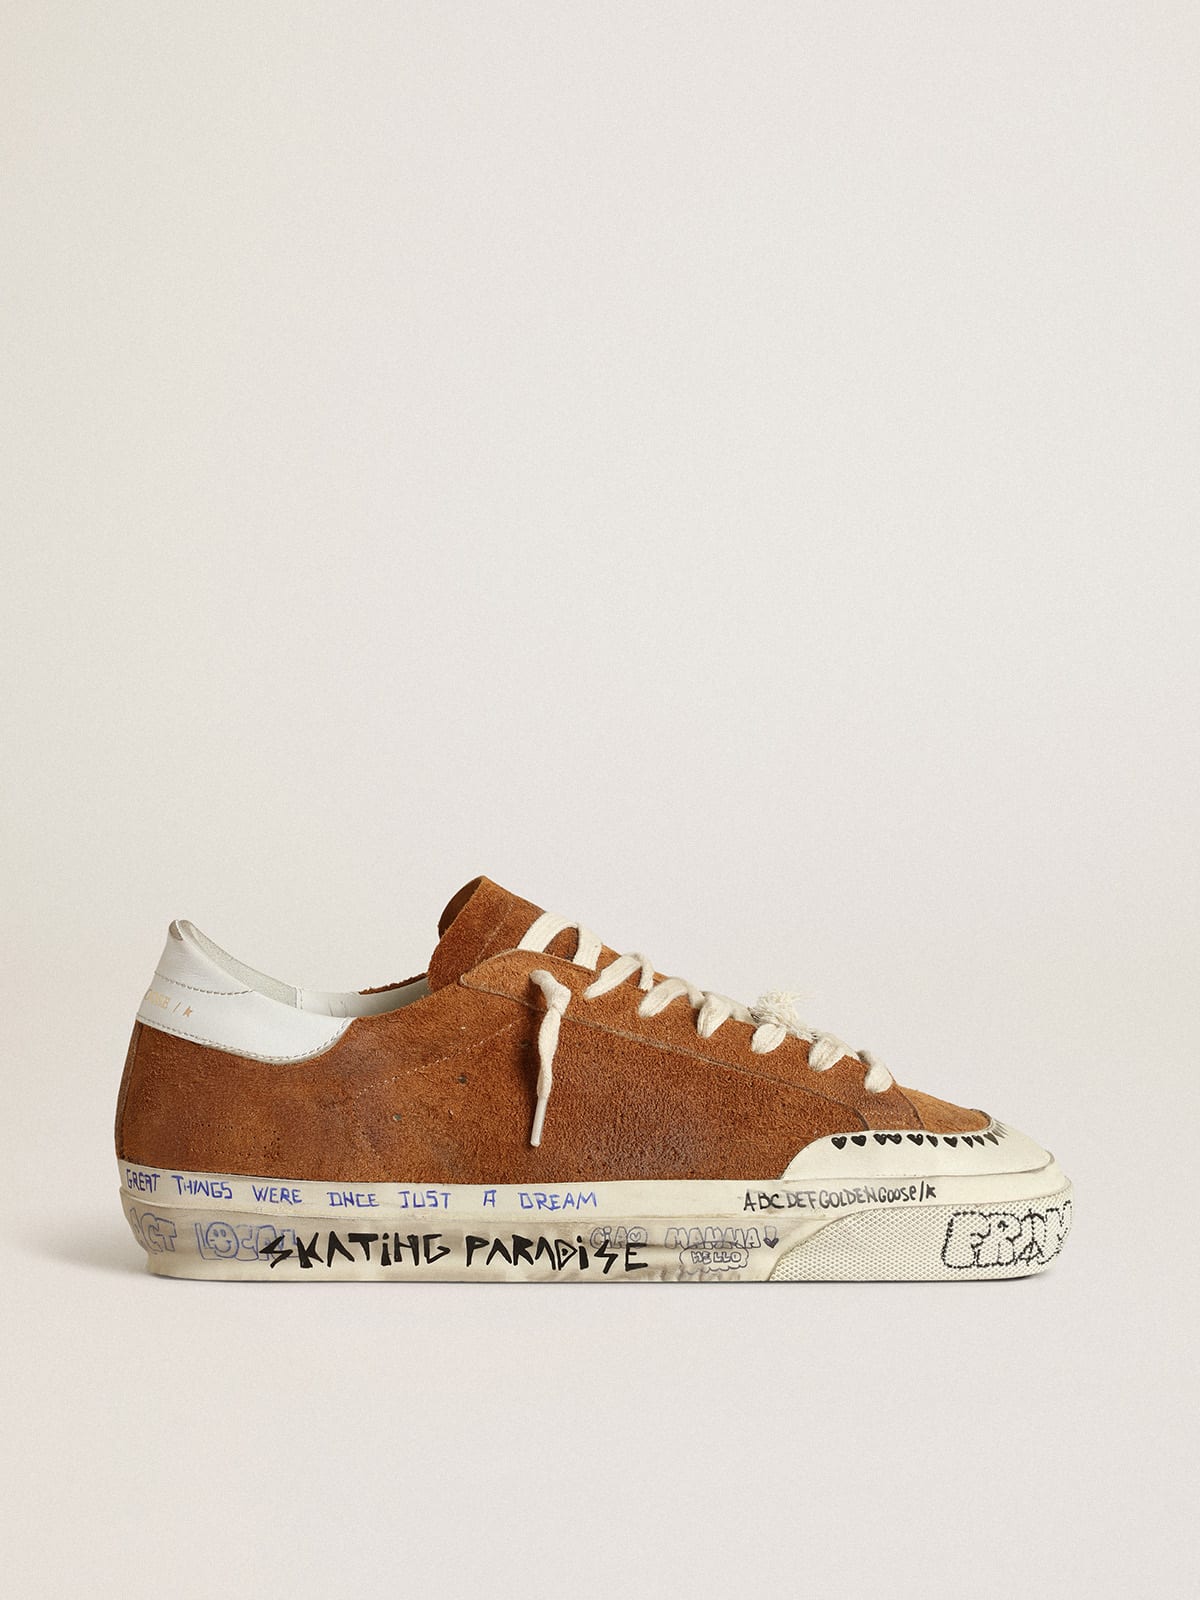 Golden Goose - Men’s Super-Star Penstar LTD in suede with a perforated star in 